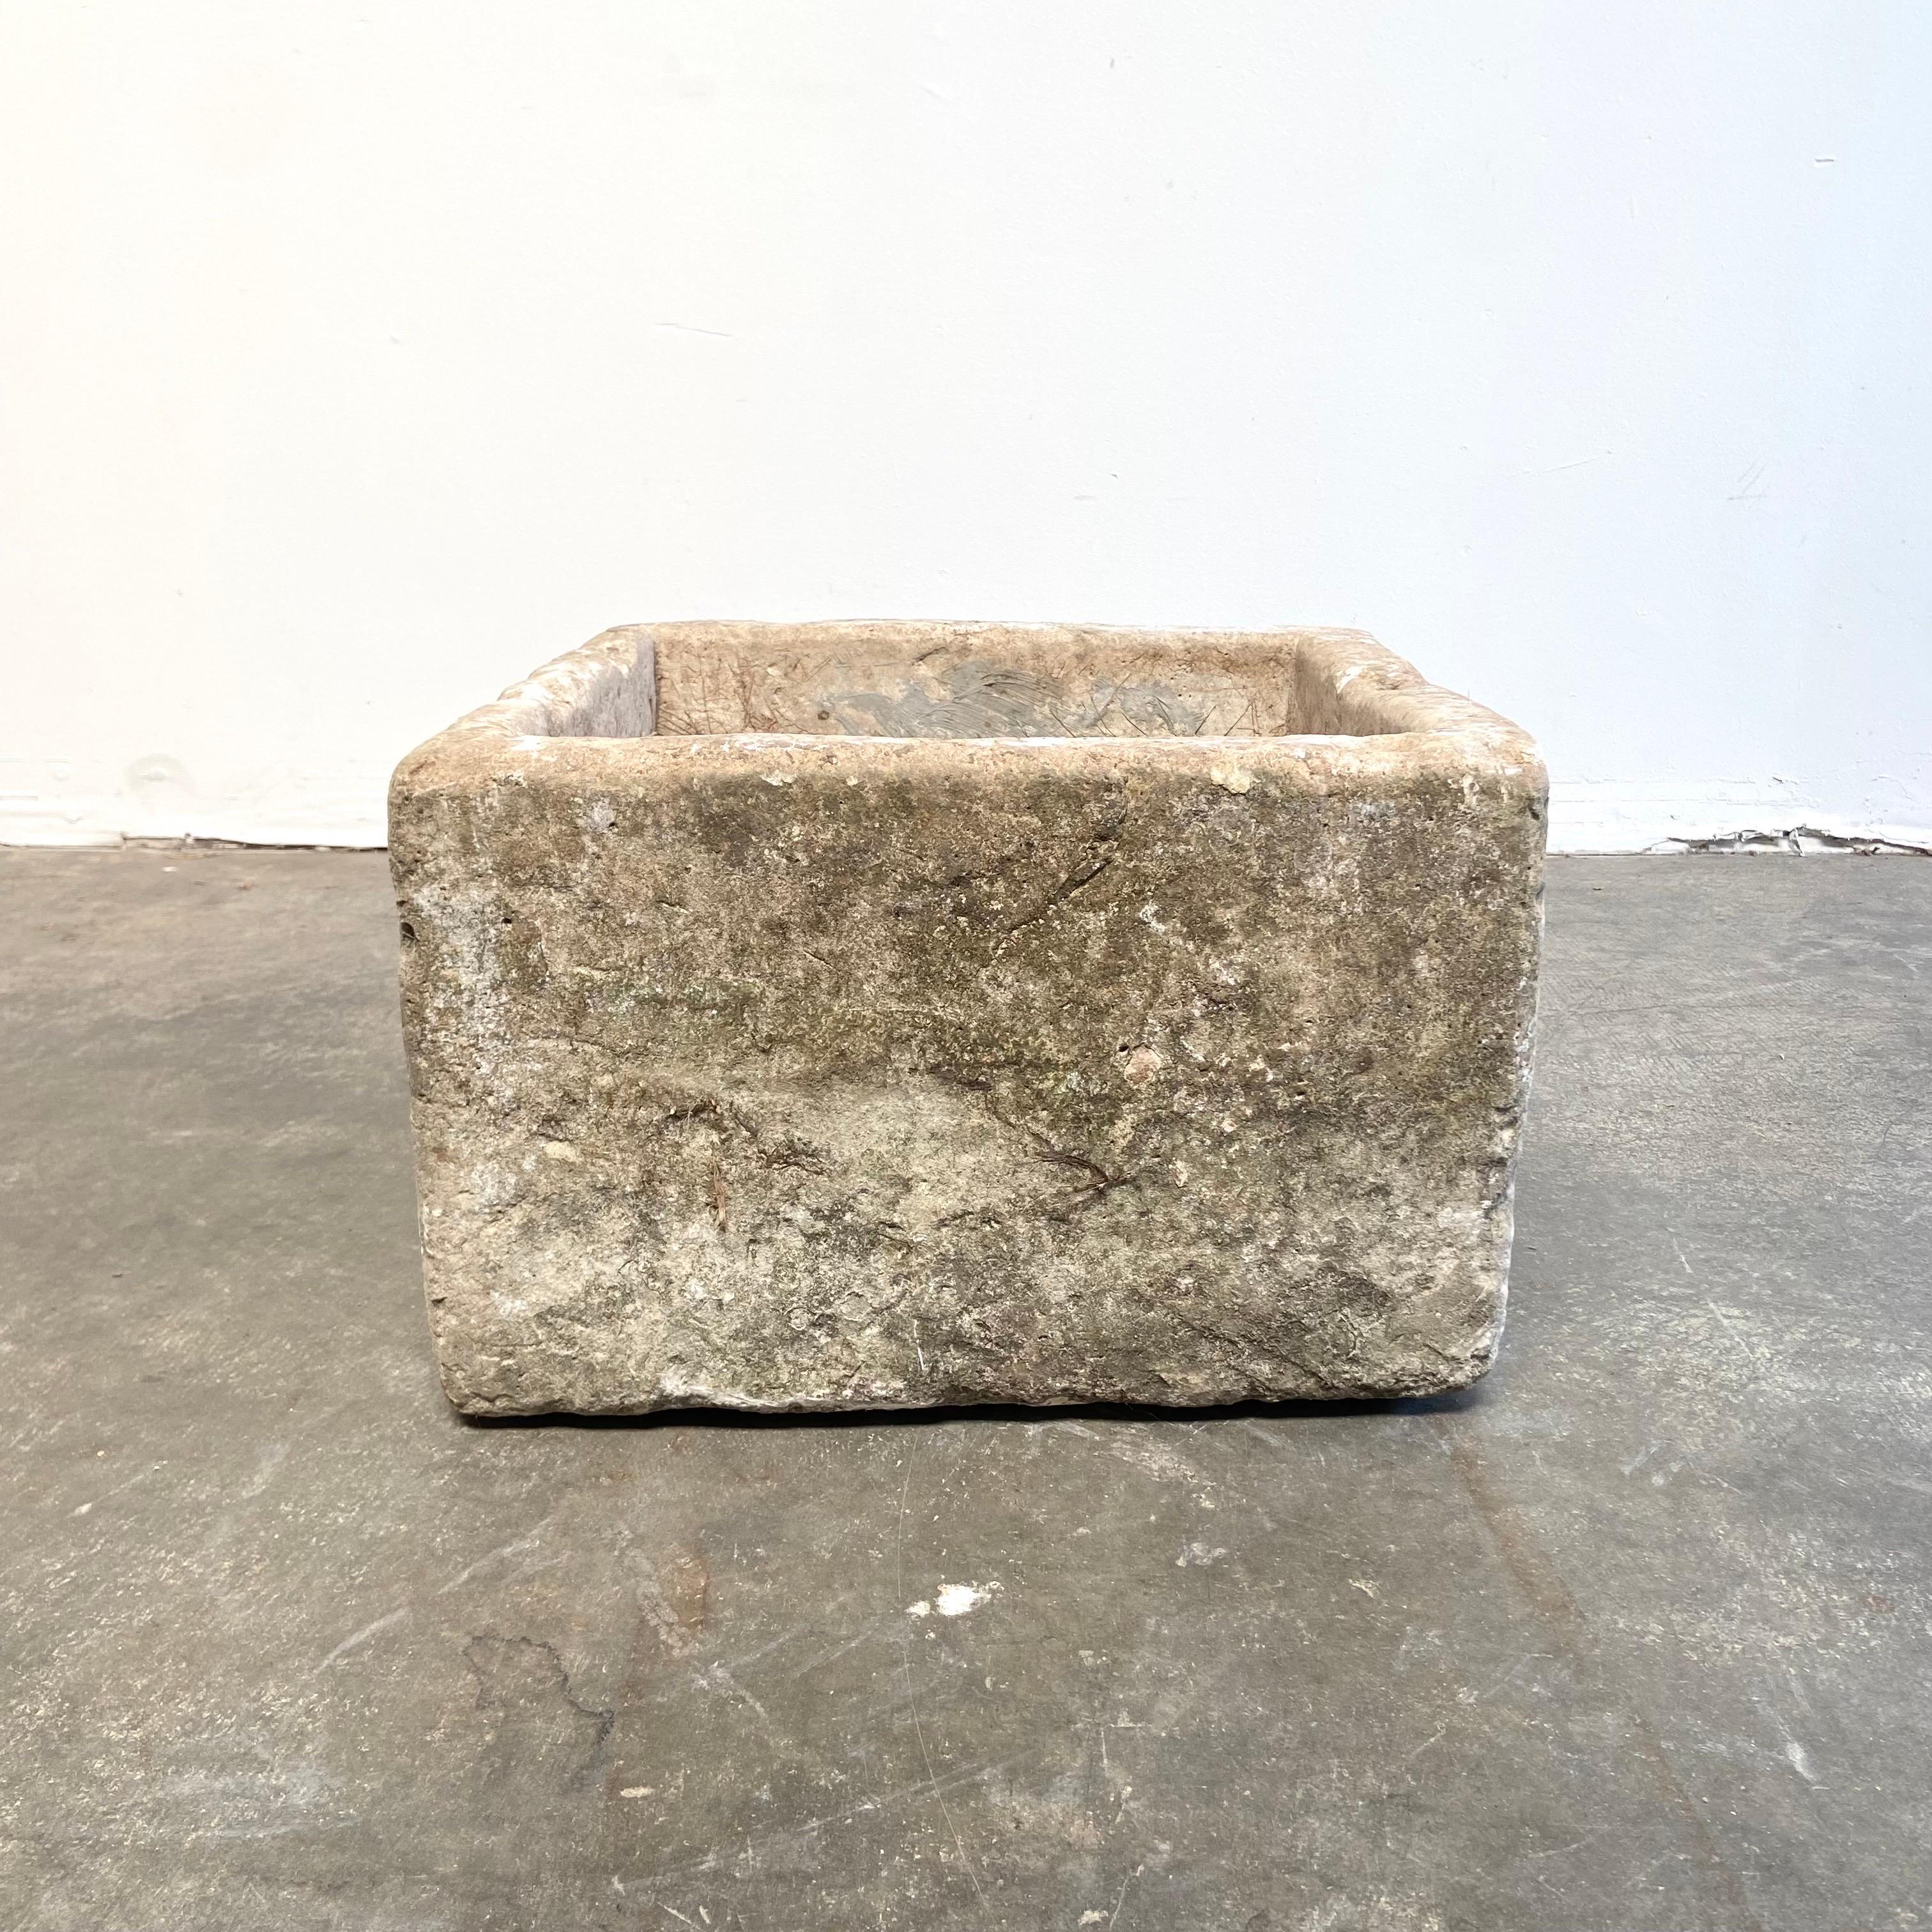 Antique European limestone trough
Great for use as a fountain, planter, or garden element.
Size: 23” W x 22” D x 15” H
Inside: 18.5” W x 17” D x 12” H
tree not included.